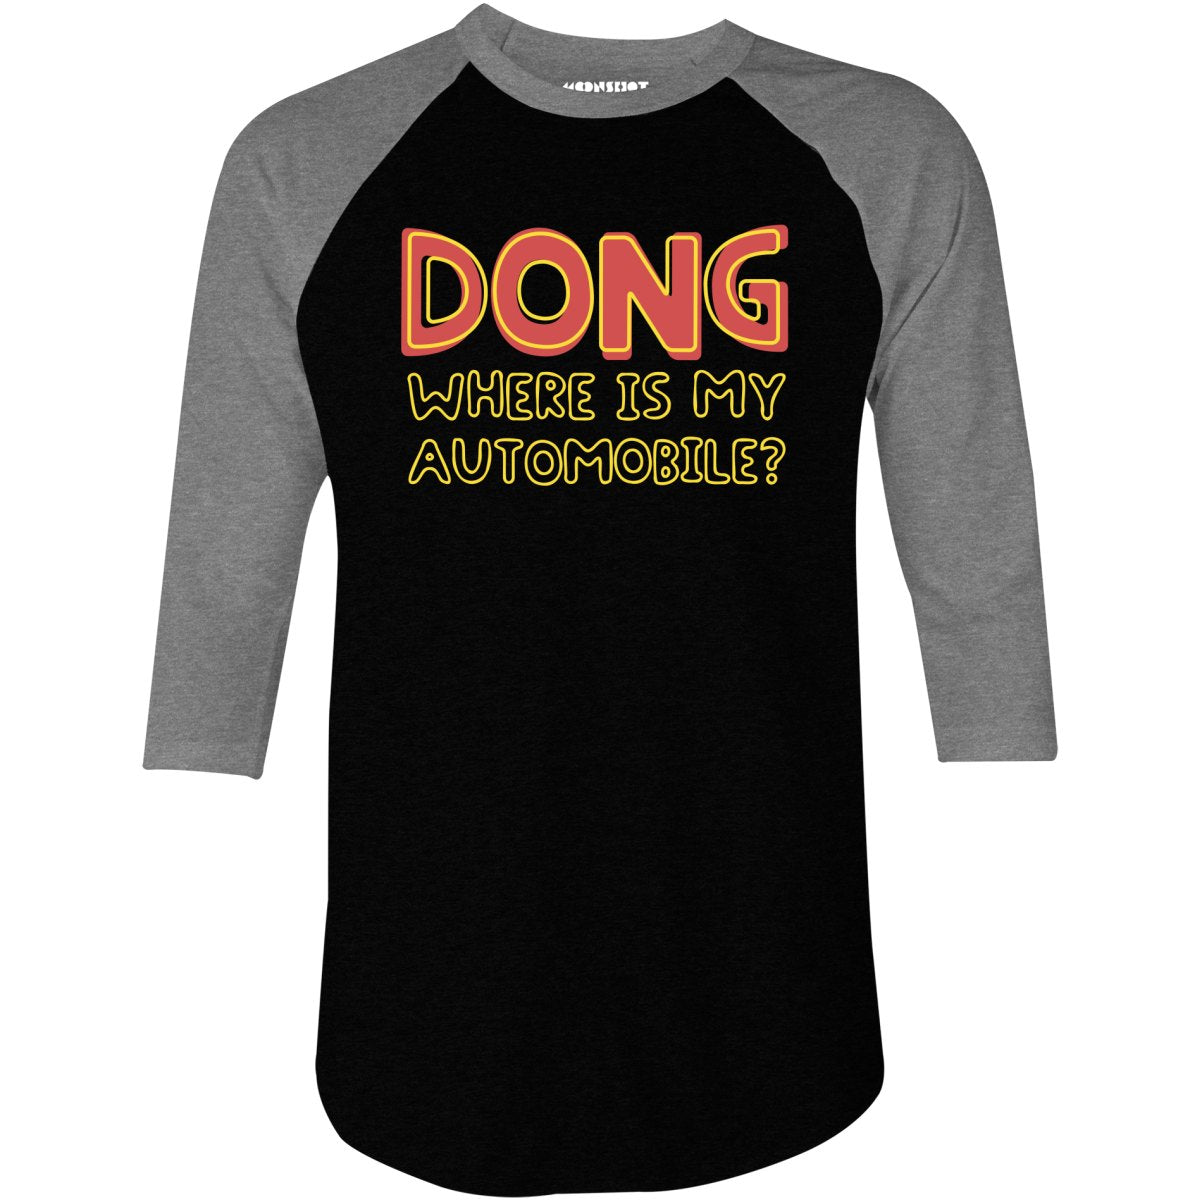 Dong Where is My Automobile? - 3/4 Sleeve Raglan T-Shirt